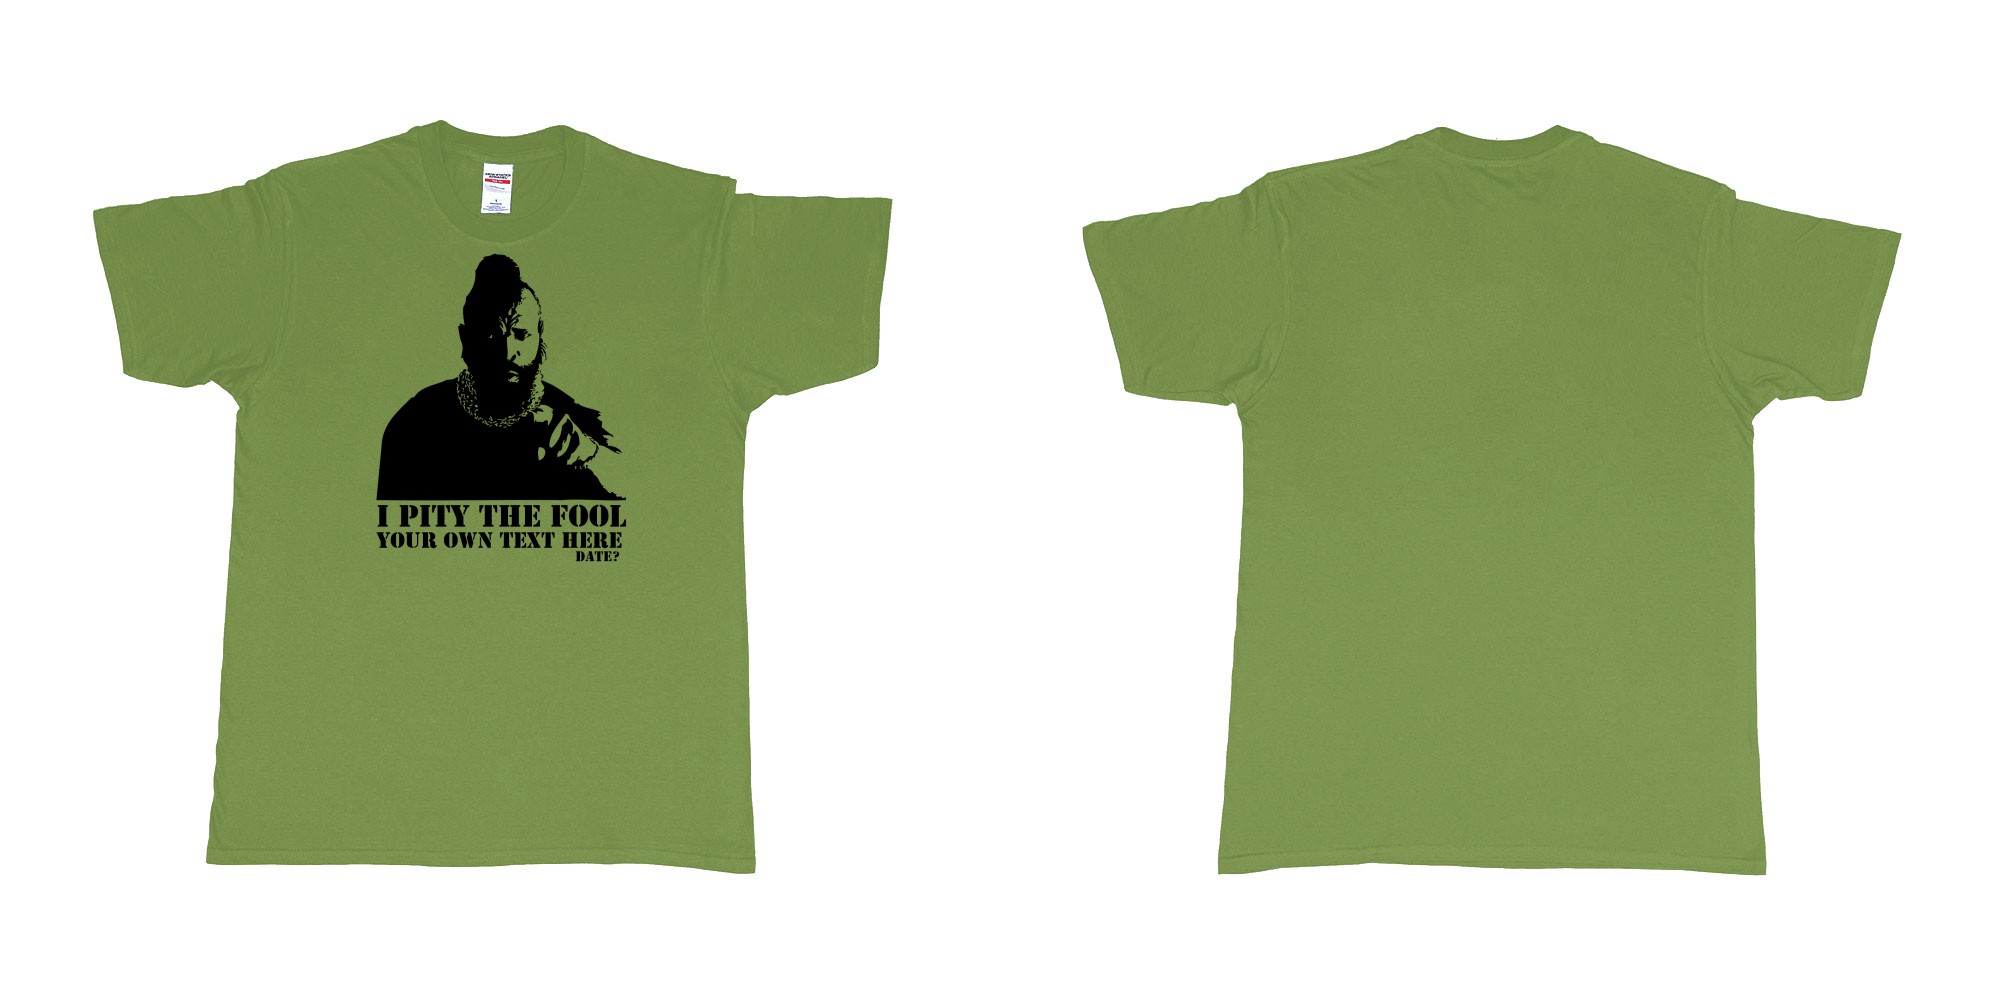 Custom tshirt design I pity the fool in fabric color military-green choice your own text made in Bali by The Pirate Way